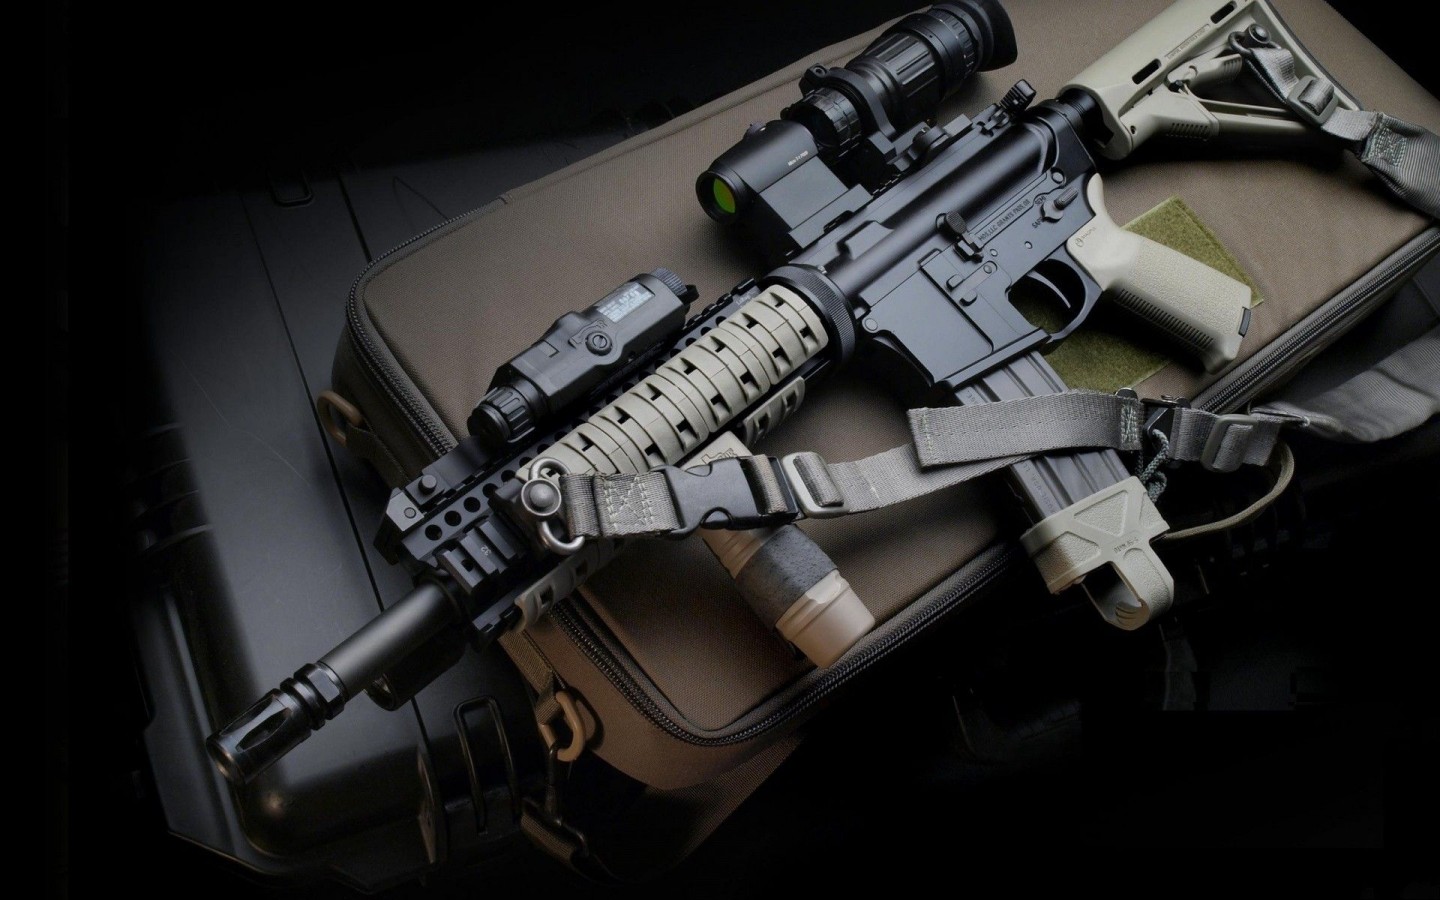 Go Back To New Military Weapons Wallpaper Next Image